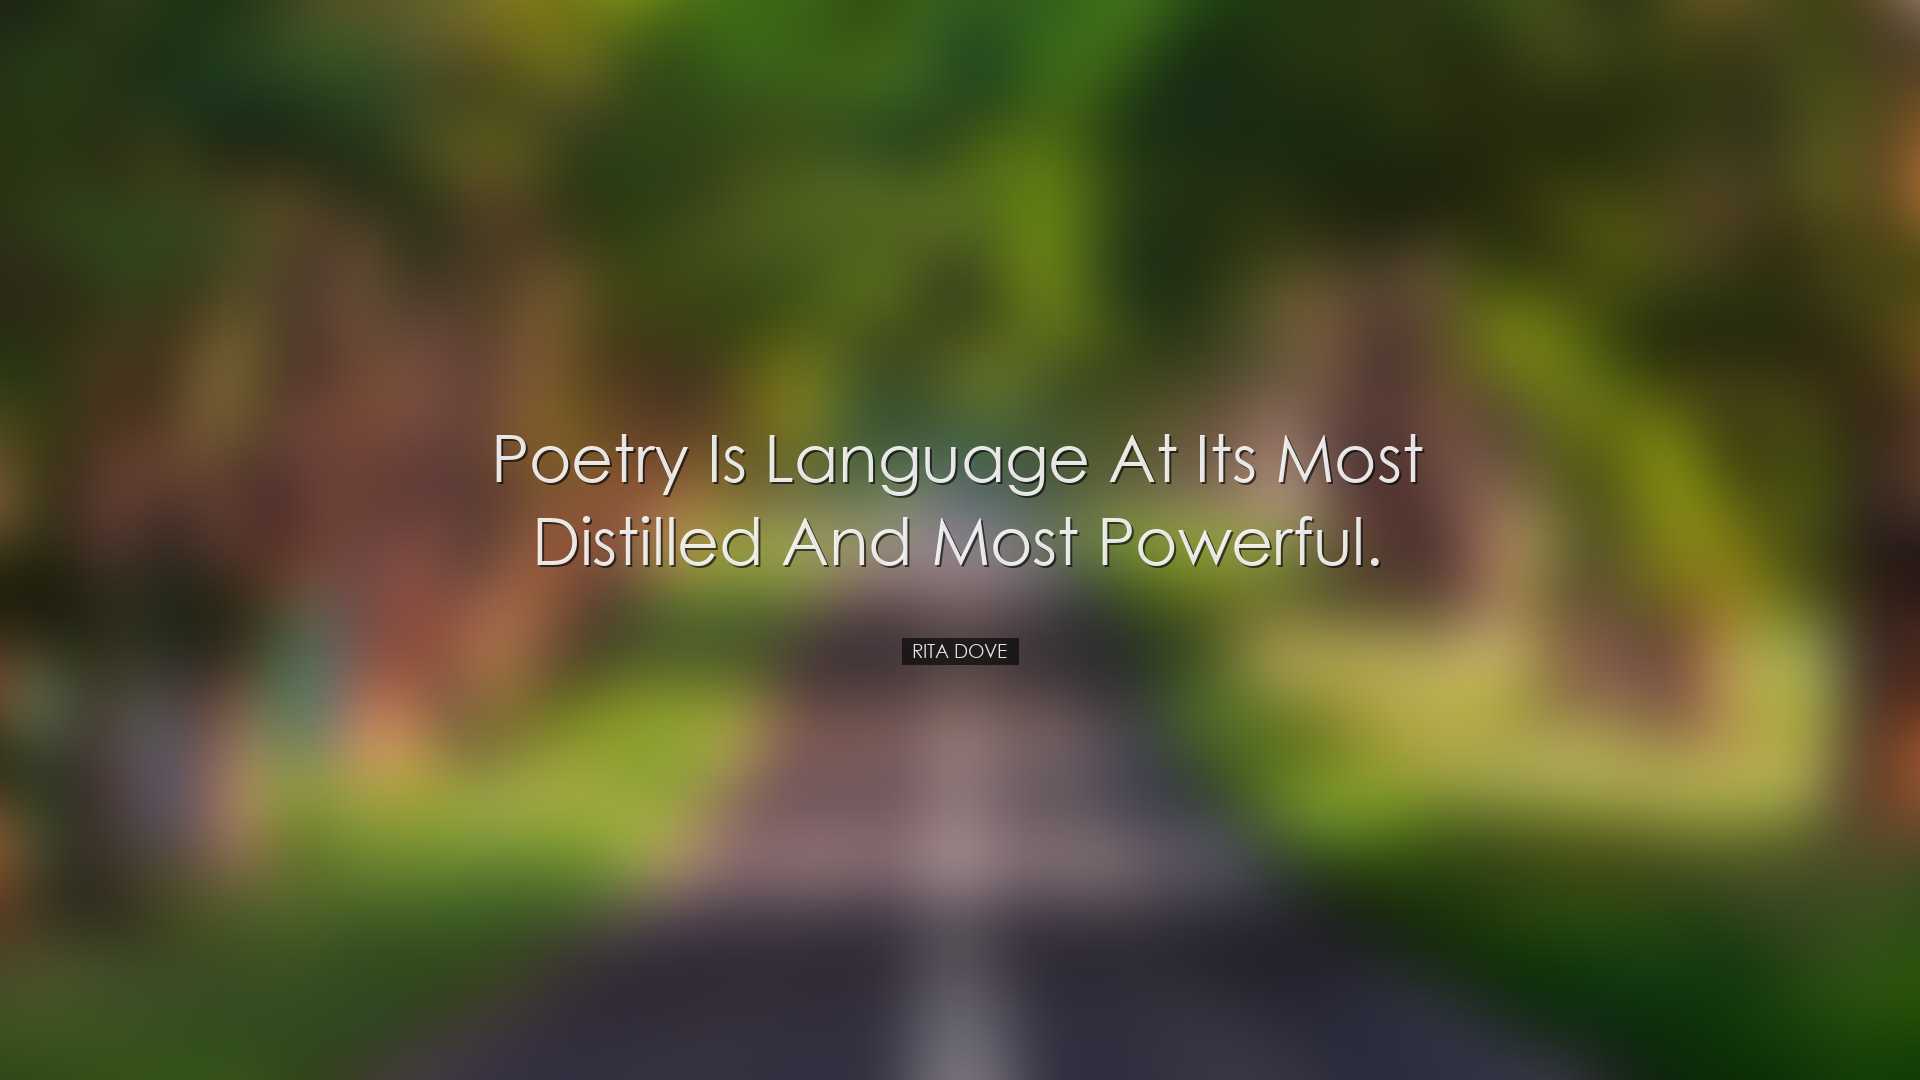 Poetry is language at its most distilled and most powerful. - Rita